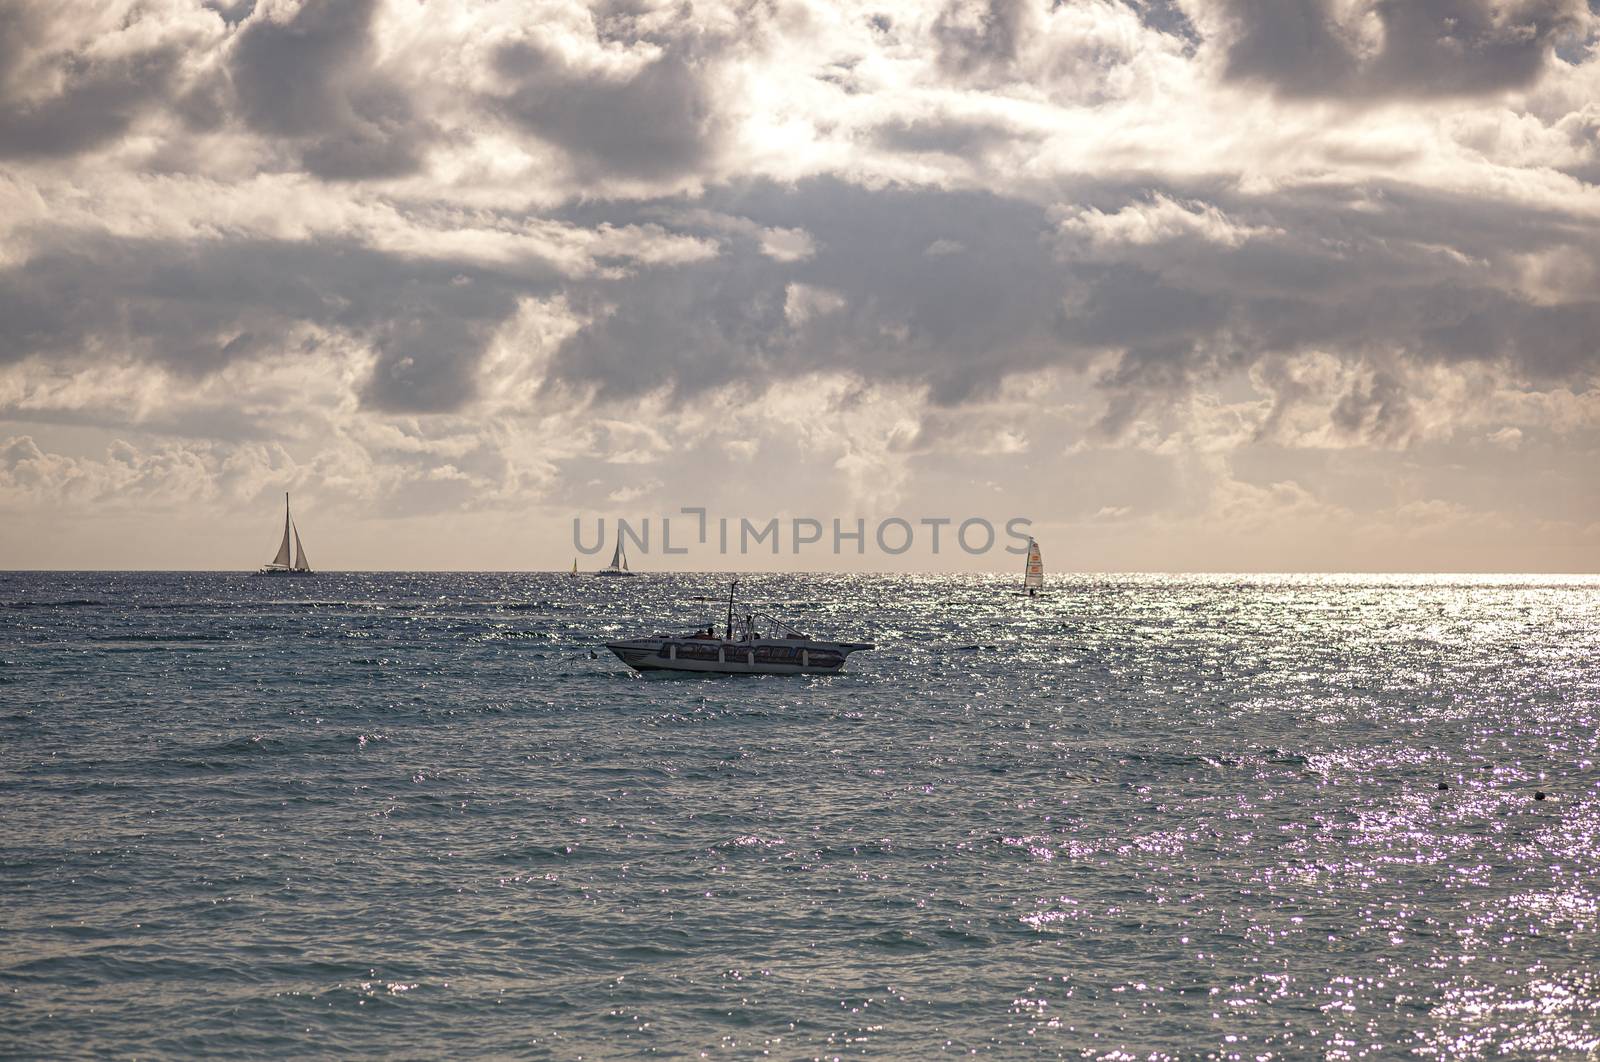 Boats on the sea on the horizon in Bayahibe, Dominican Republic